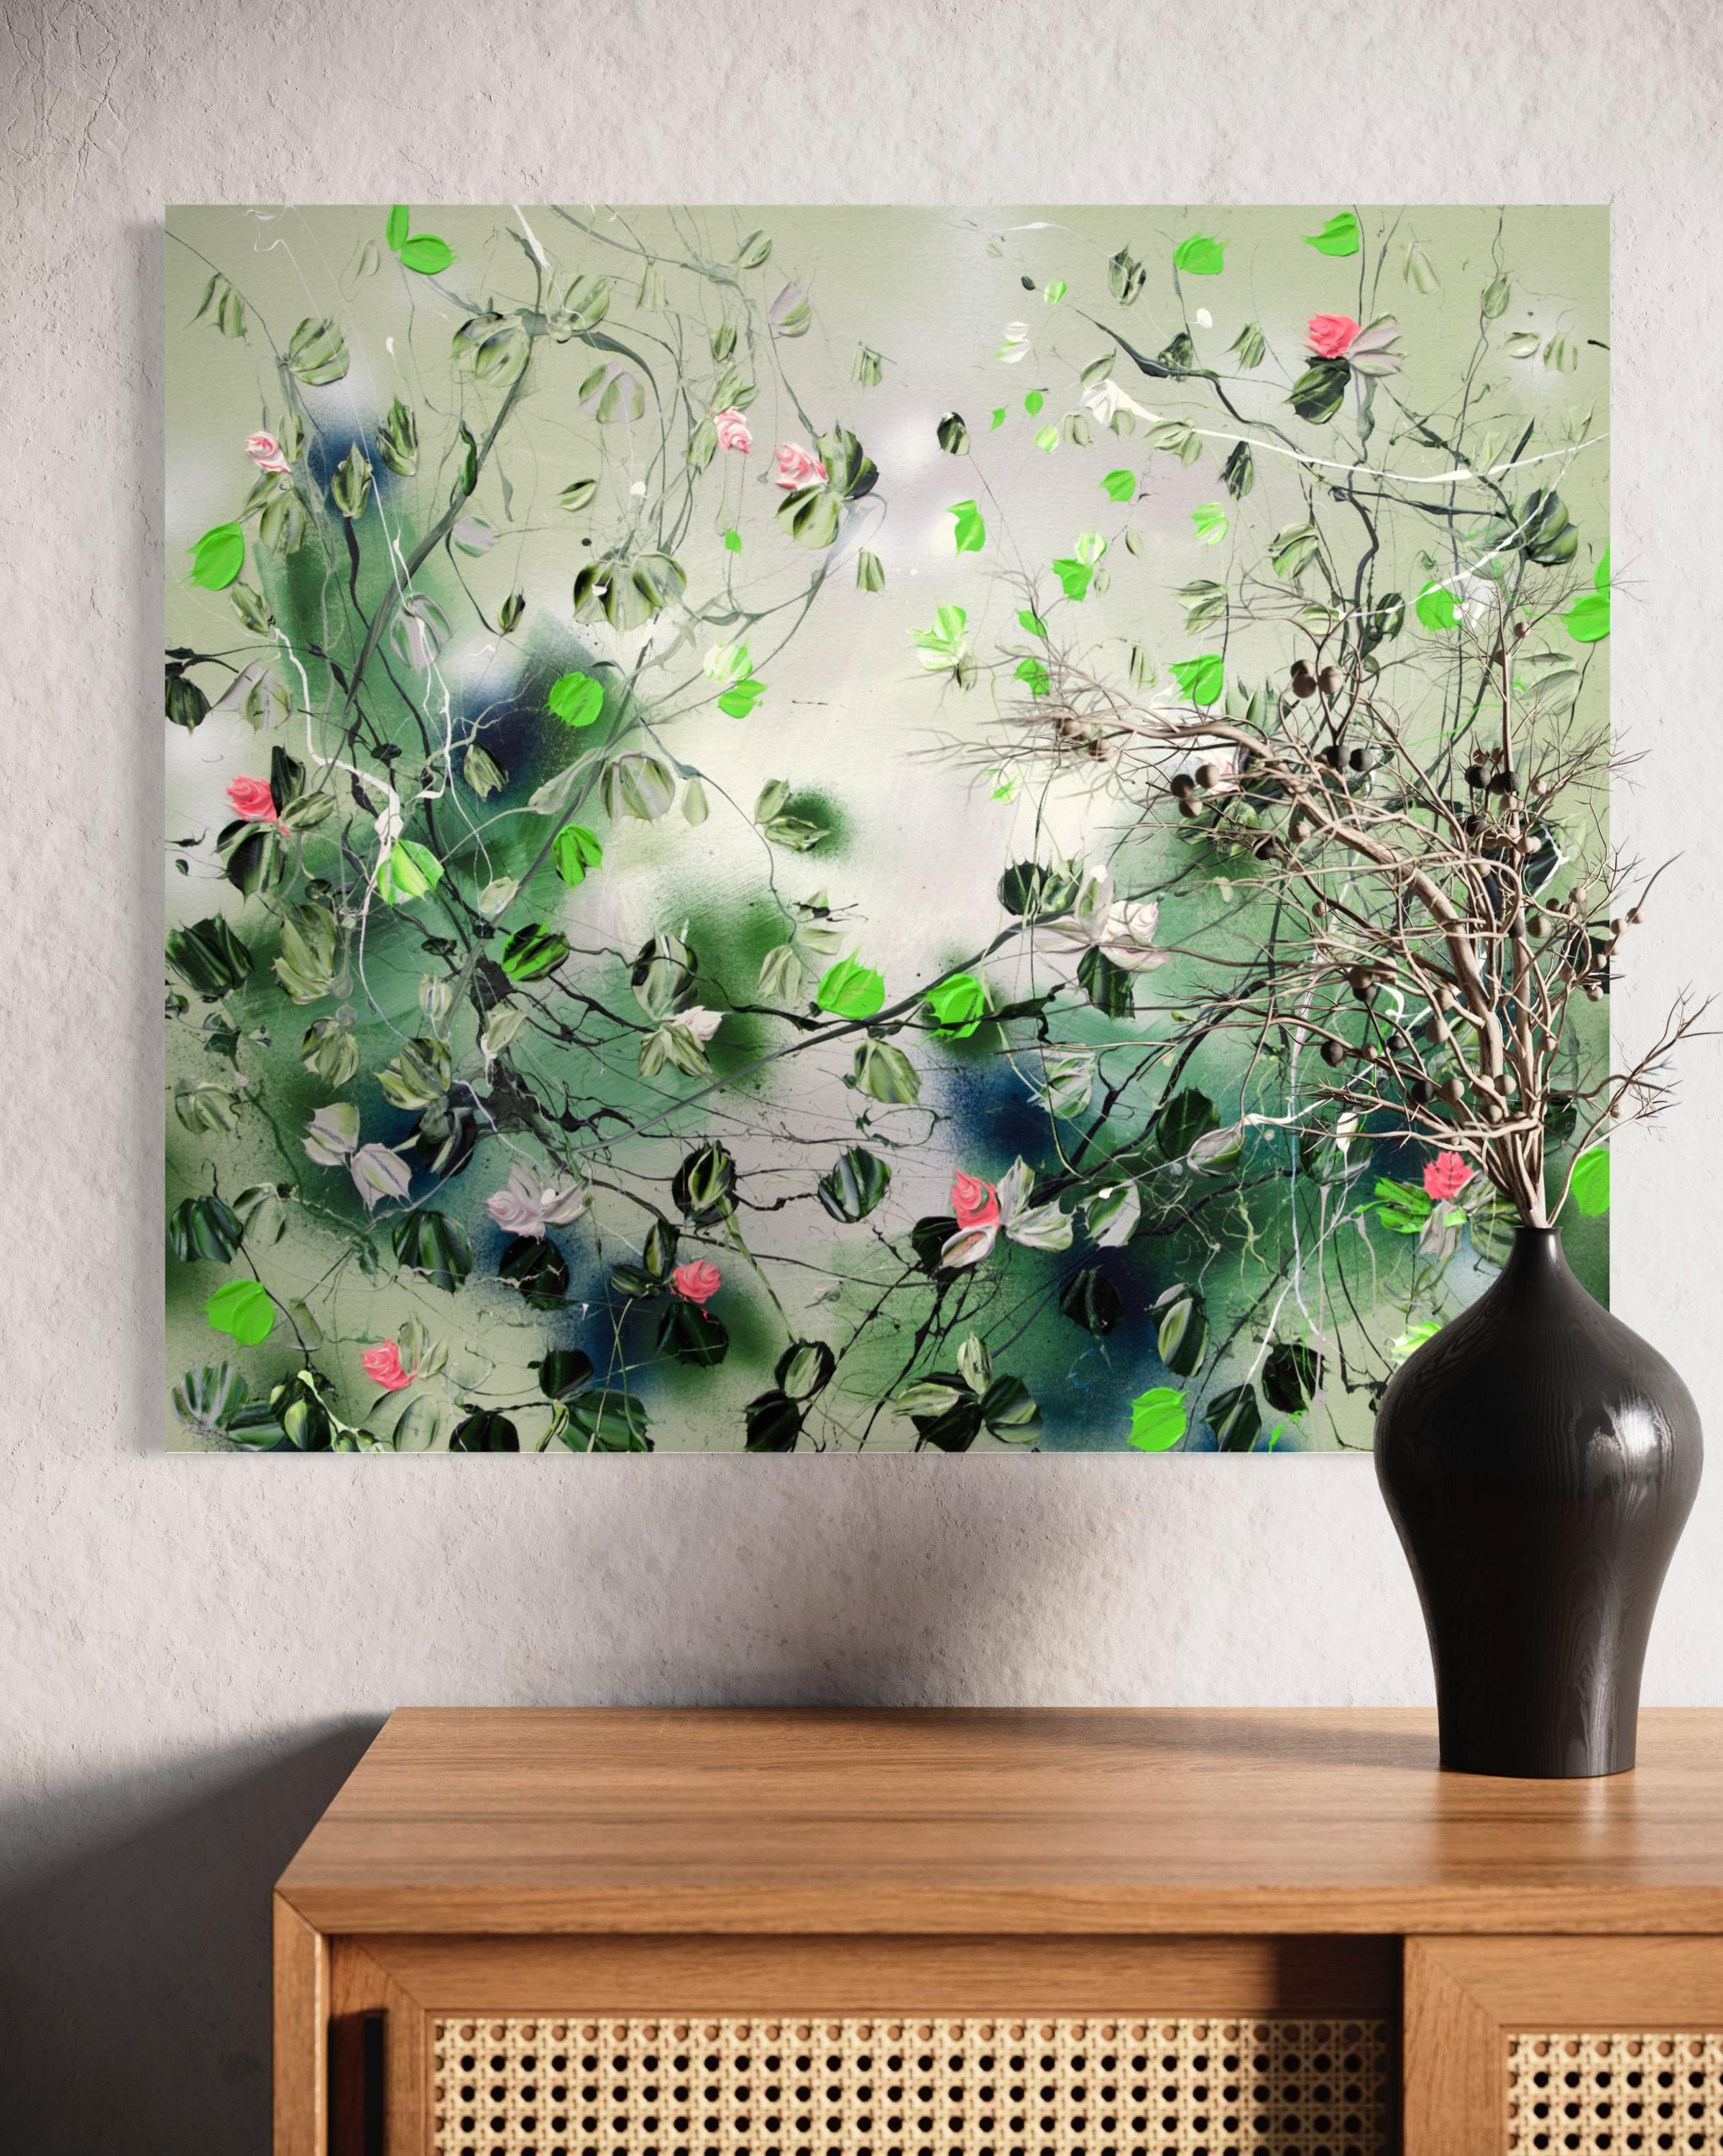 Experience the beauty and interconnectedness of nature through my original artwork. This abstract textured acrylic painting on canvas measures 60x70x3,5 cm (23,6x27,5x1,4 inches) and features mixed media on a gallery wrapped canvas. The piece is